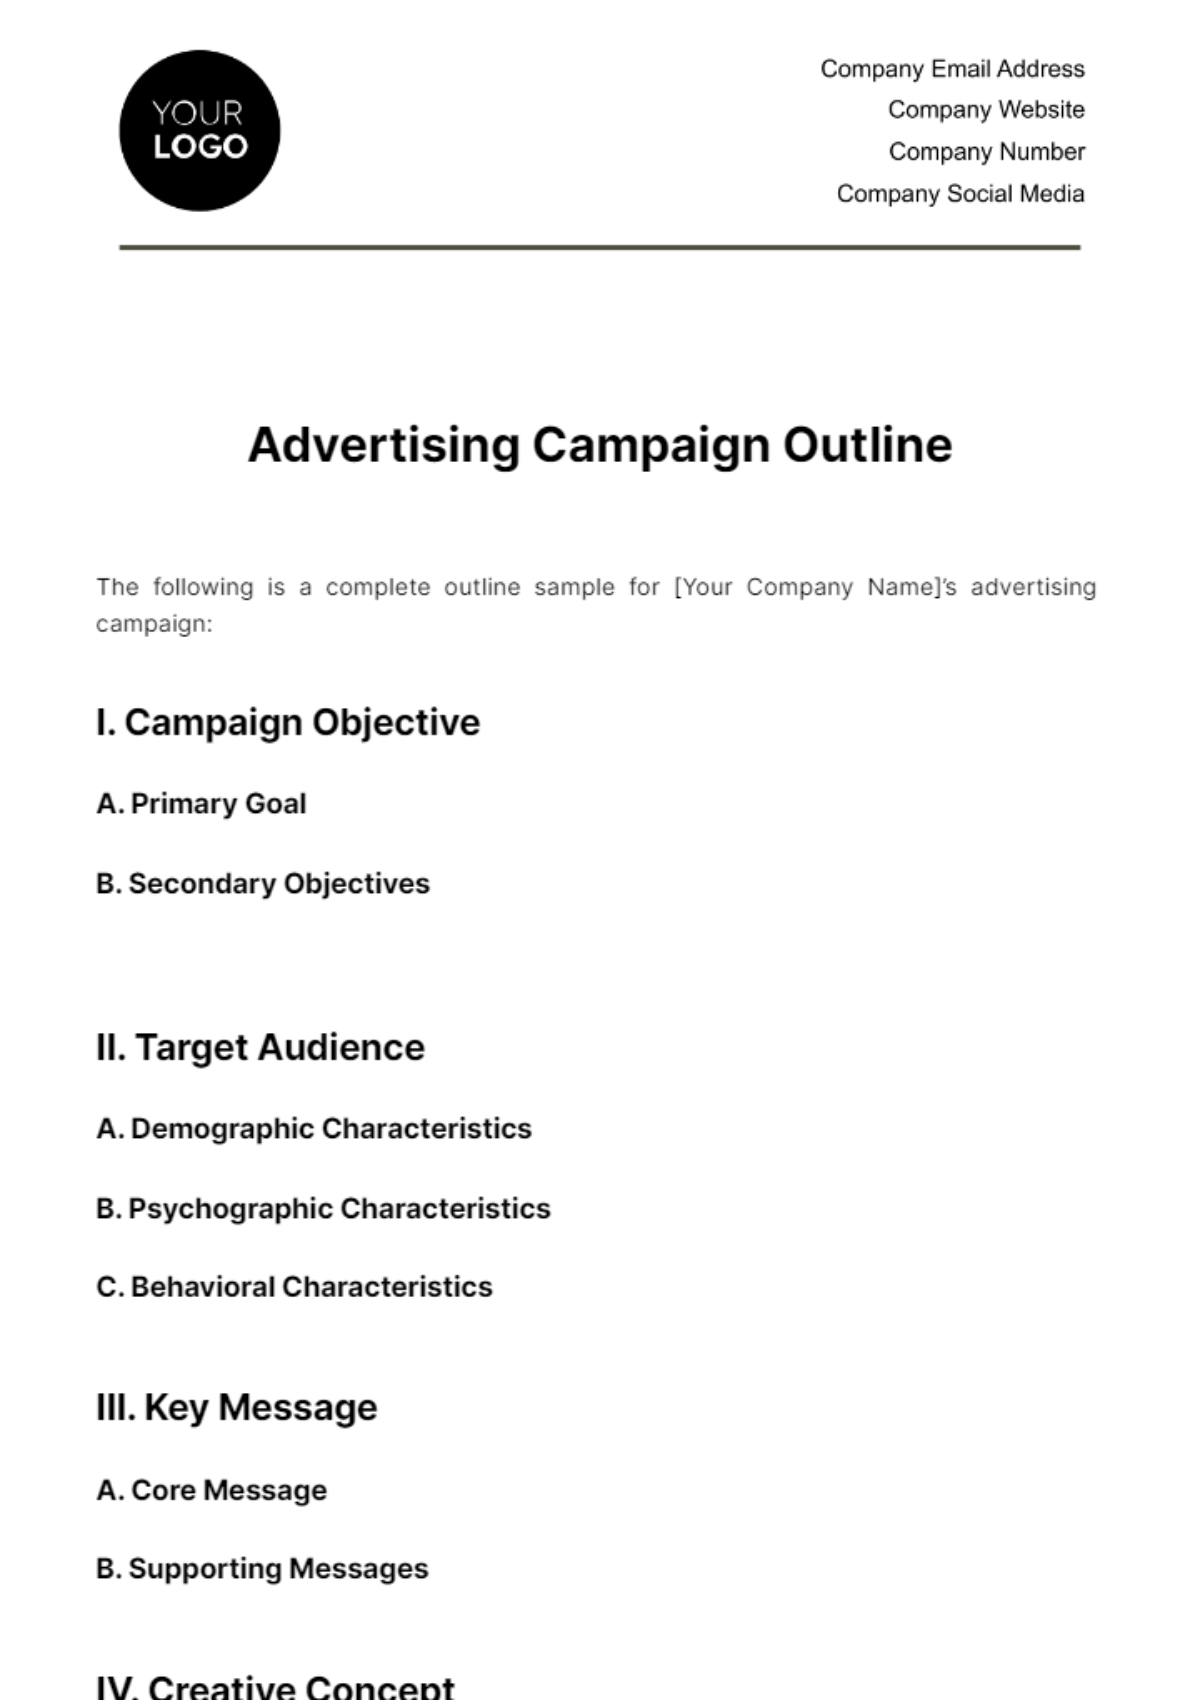 Advertising Campaign Outline Template